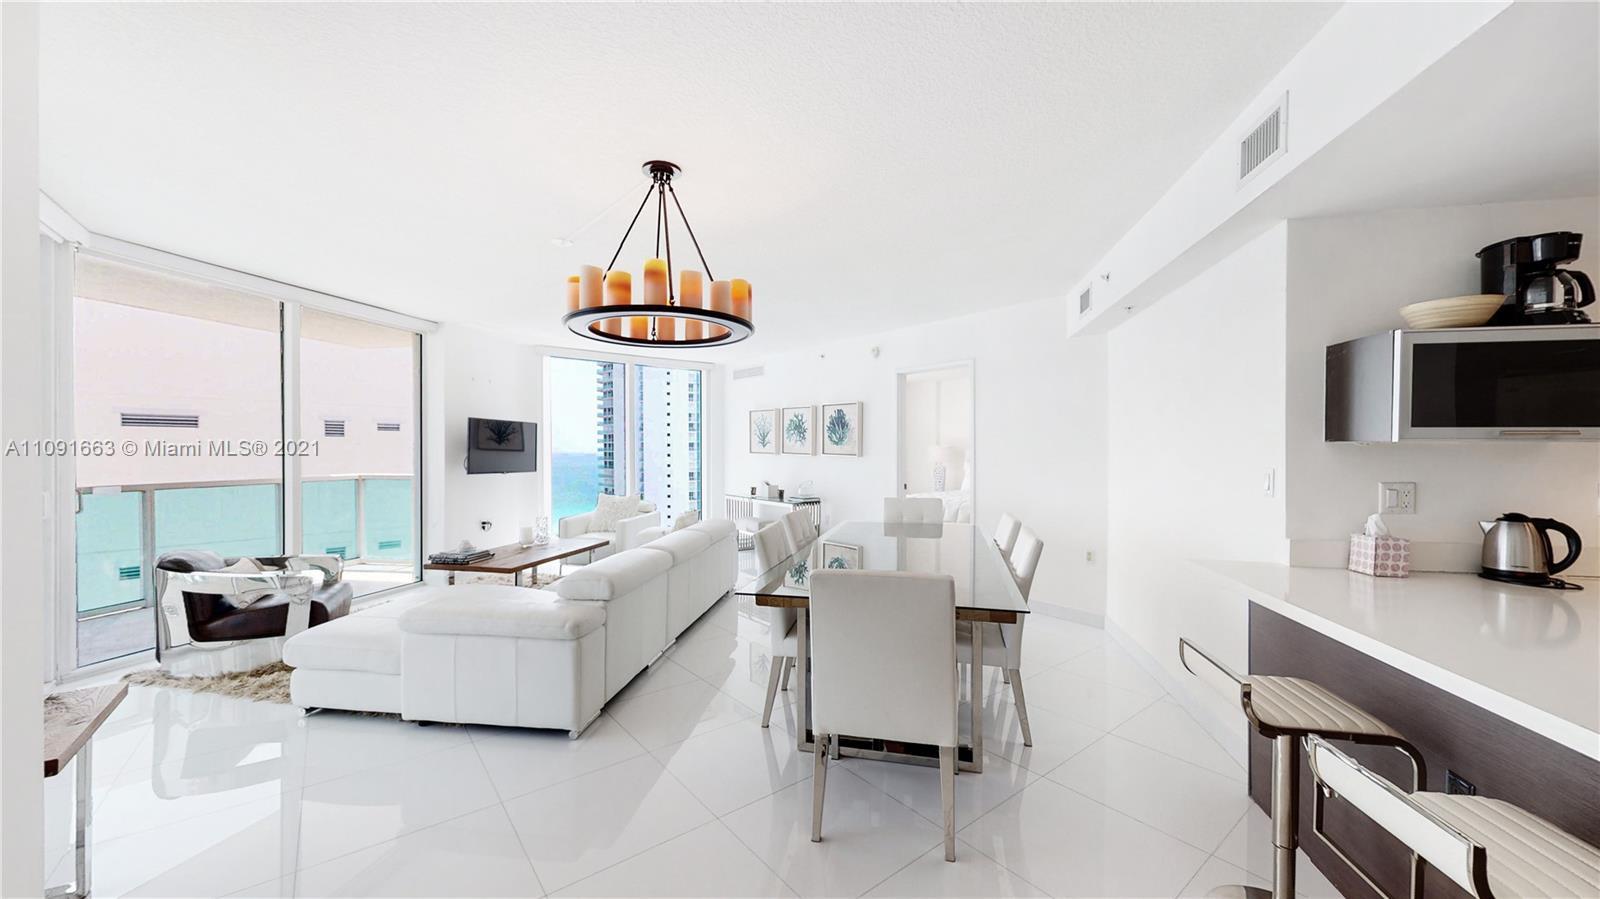 Spacious 3 bed| 2 bath Residence in impeccable condition at St.Tropez on the Bay in the heart of Sun